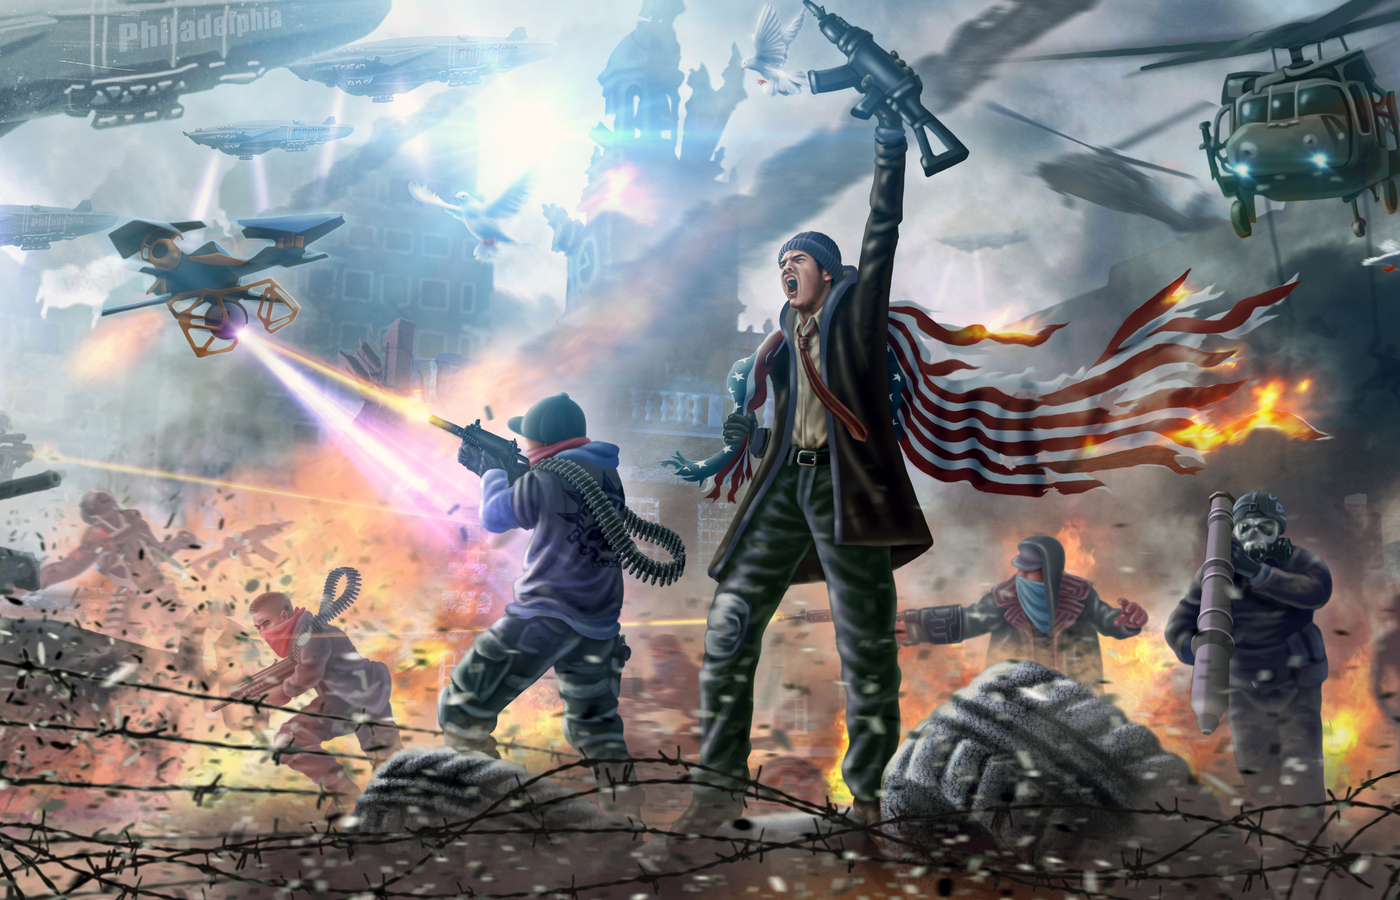 Homefront Wallpapers